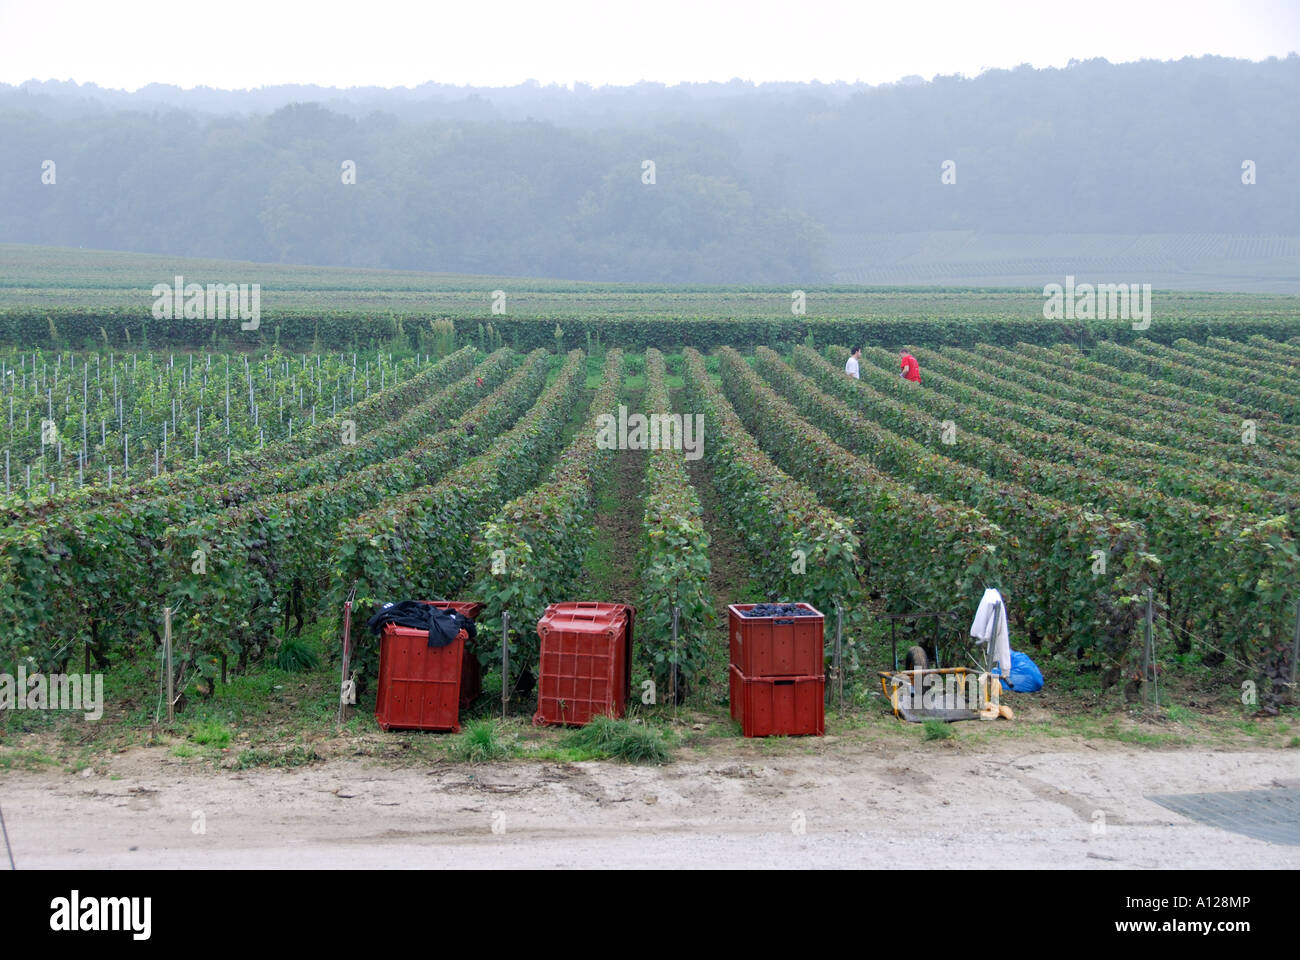 'Bins and grape pickers, 'Villers Allerand', 'Champagne Ardennes', France' Stock Photo